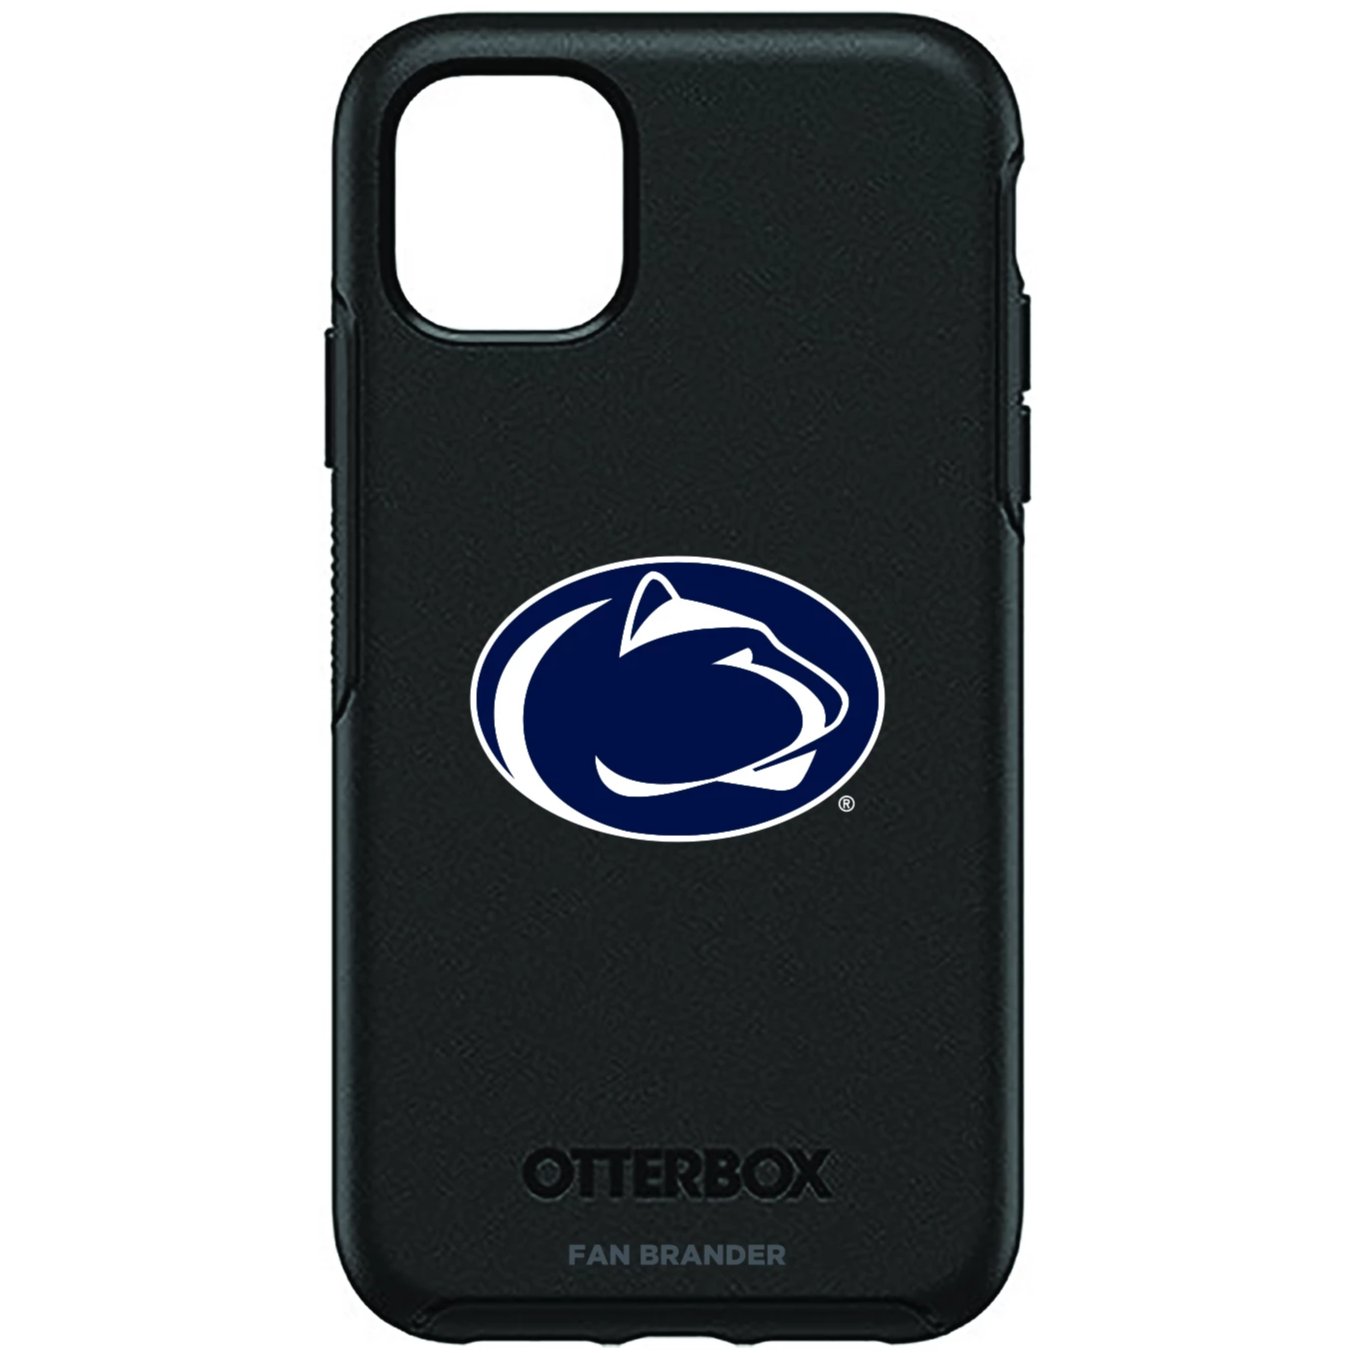 Penn State Nittany Lions Otterbox Symmetry Case (for iPhone 11, Pro, Pro Max)